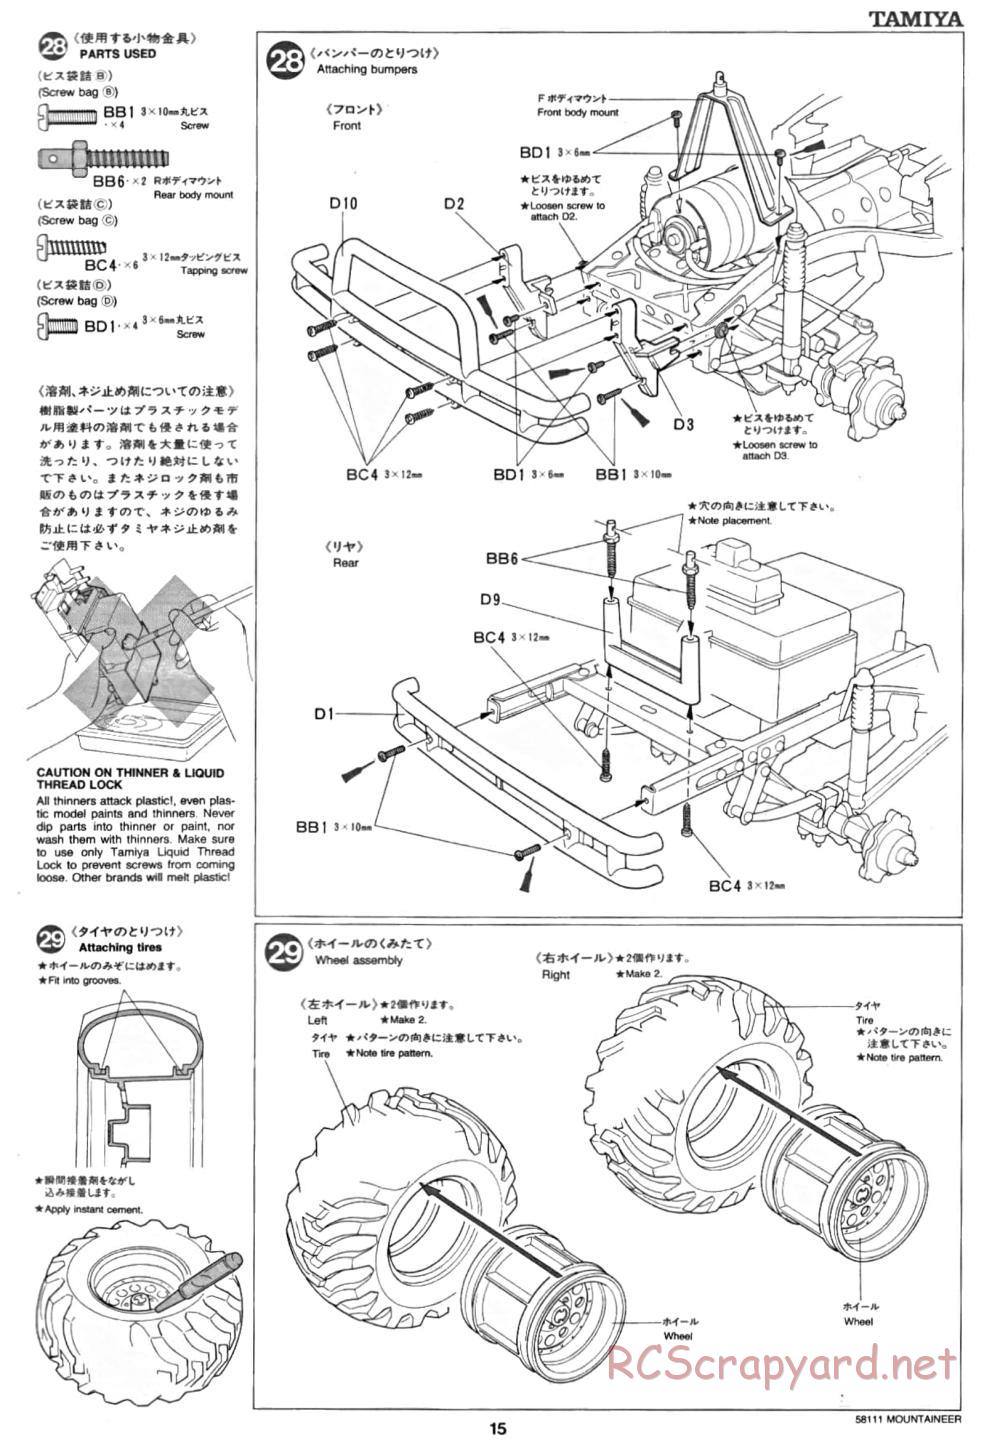 Tamiya - Toyota 4x4 Pick Up Mountaineer Chassis - Manual - Page 15